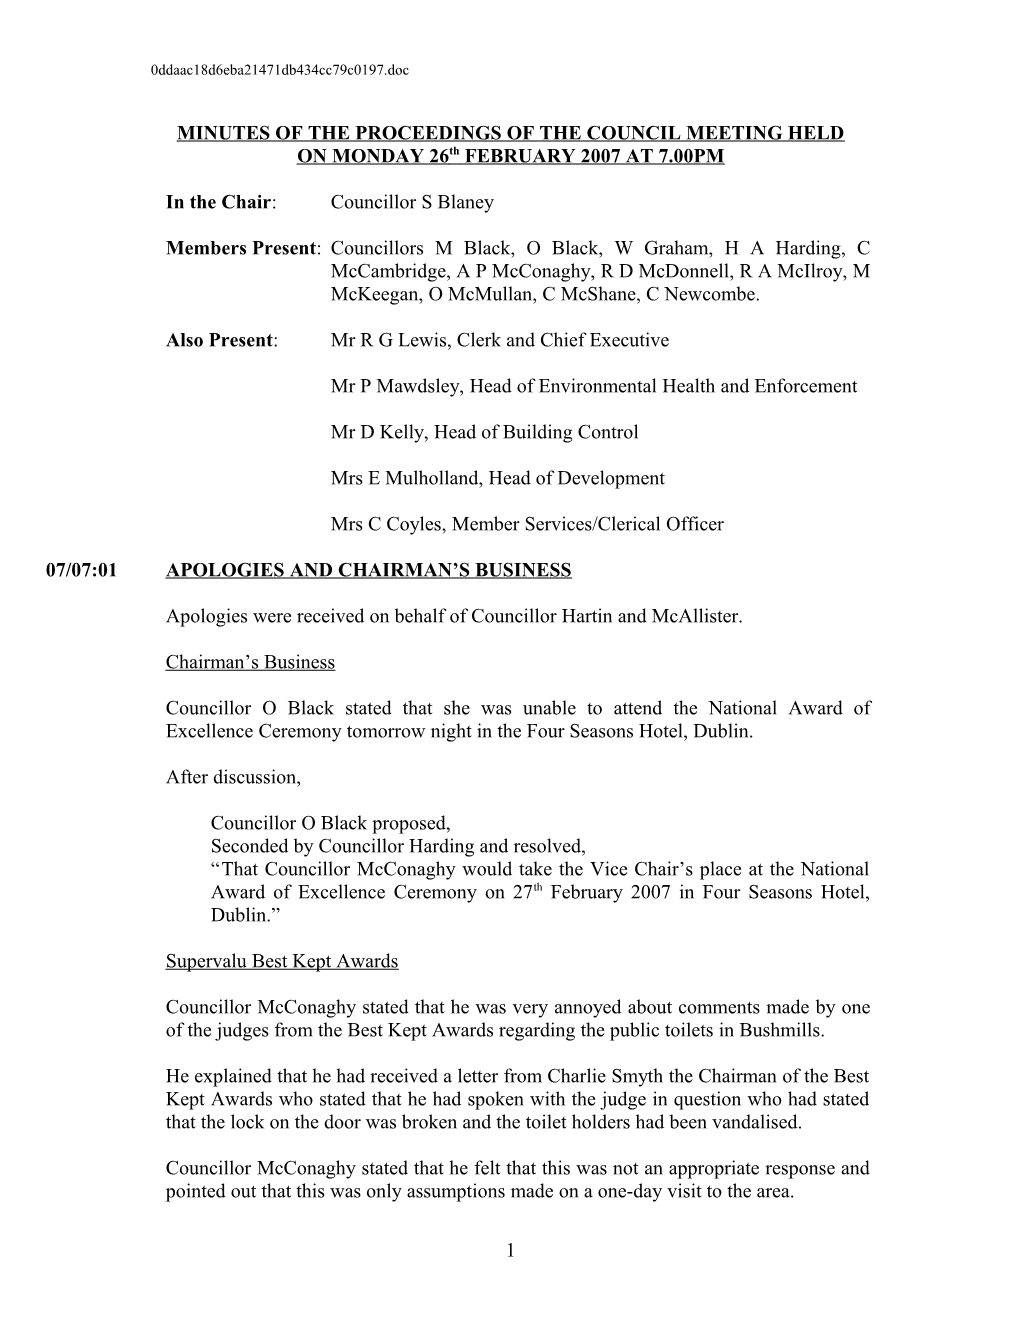 Minutes of the Proceedings of the Council Meeting Held s6